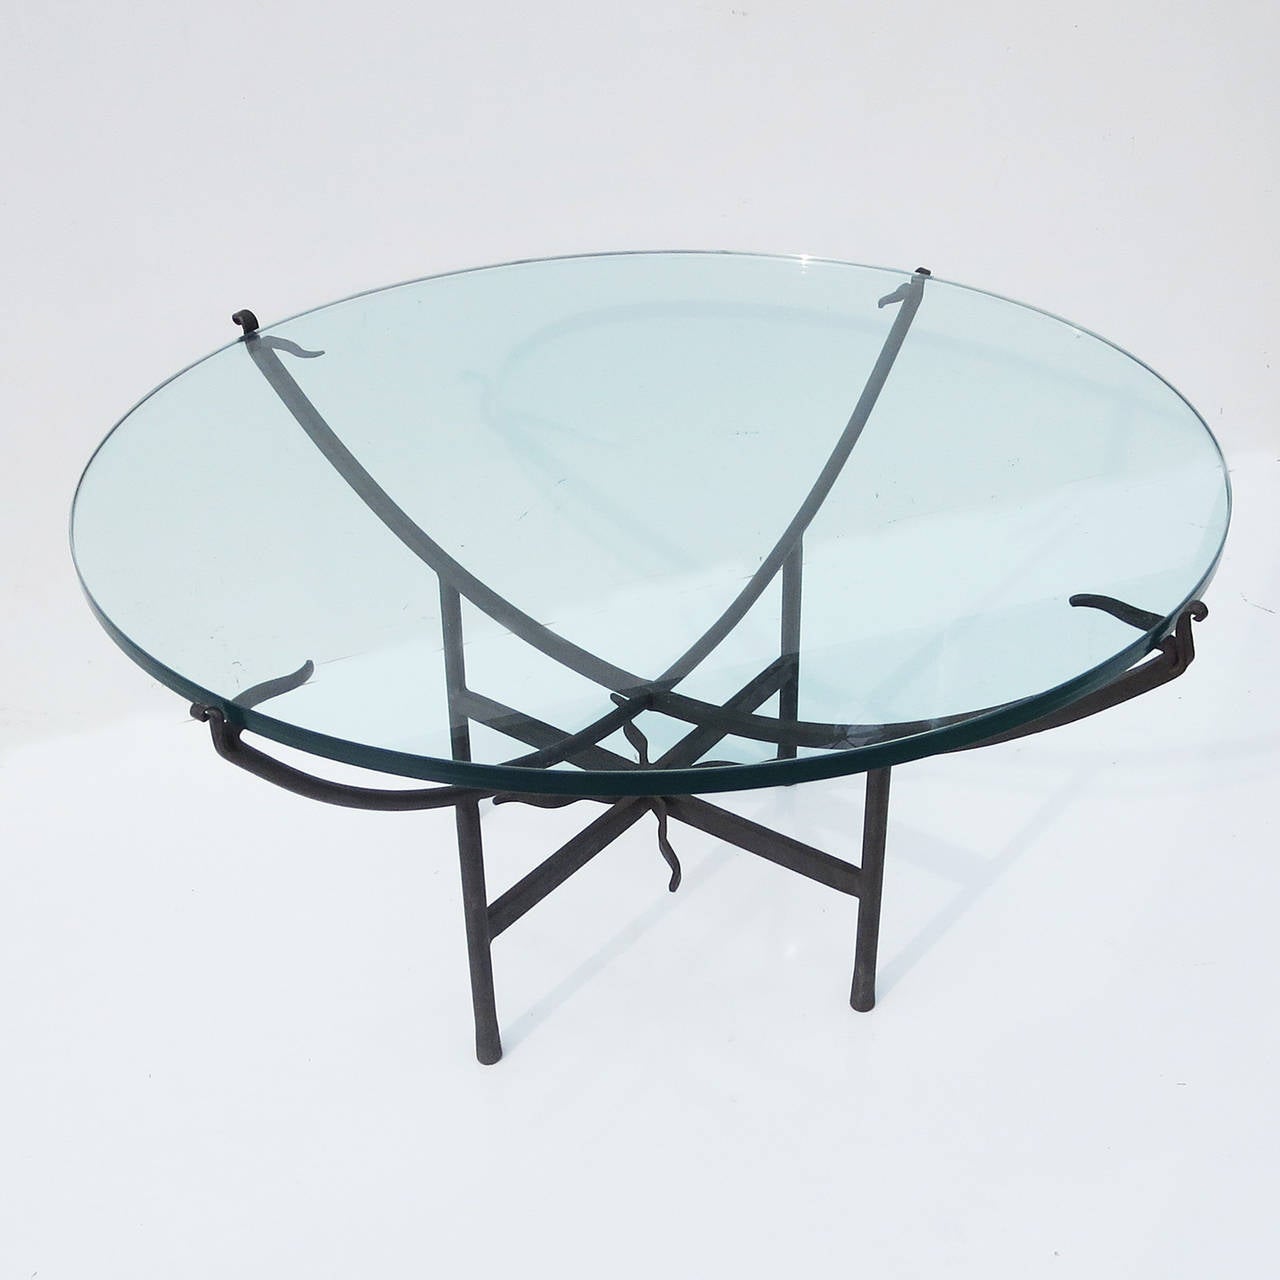 A great design of clean lines and modern influence. The table can be used in an interior or exterior setting. All iron and polished glass top are in excellent original condition, and display very well.